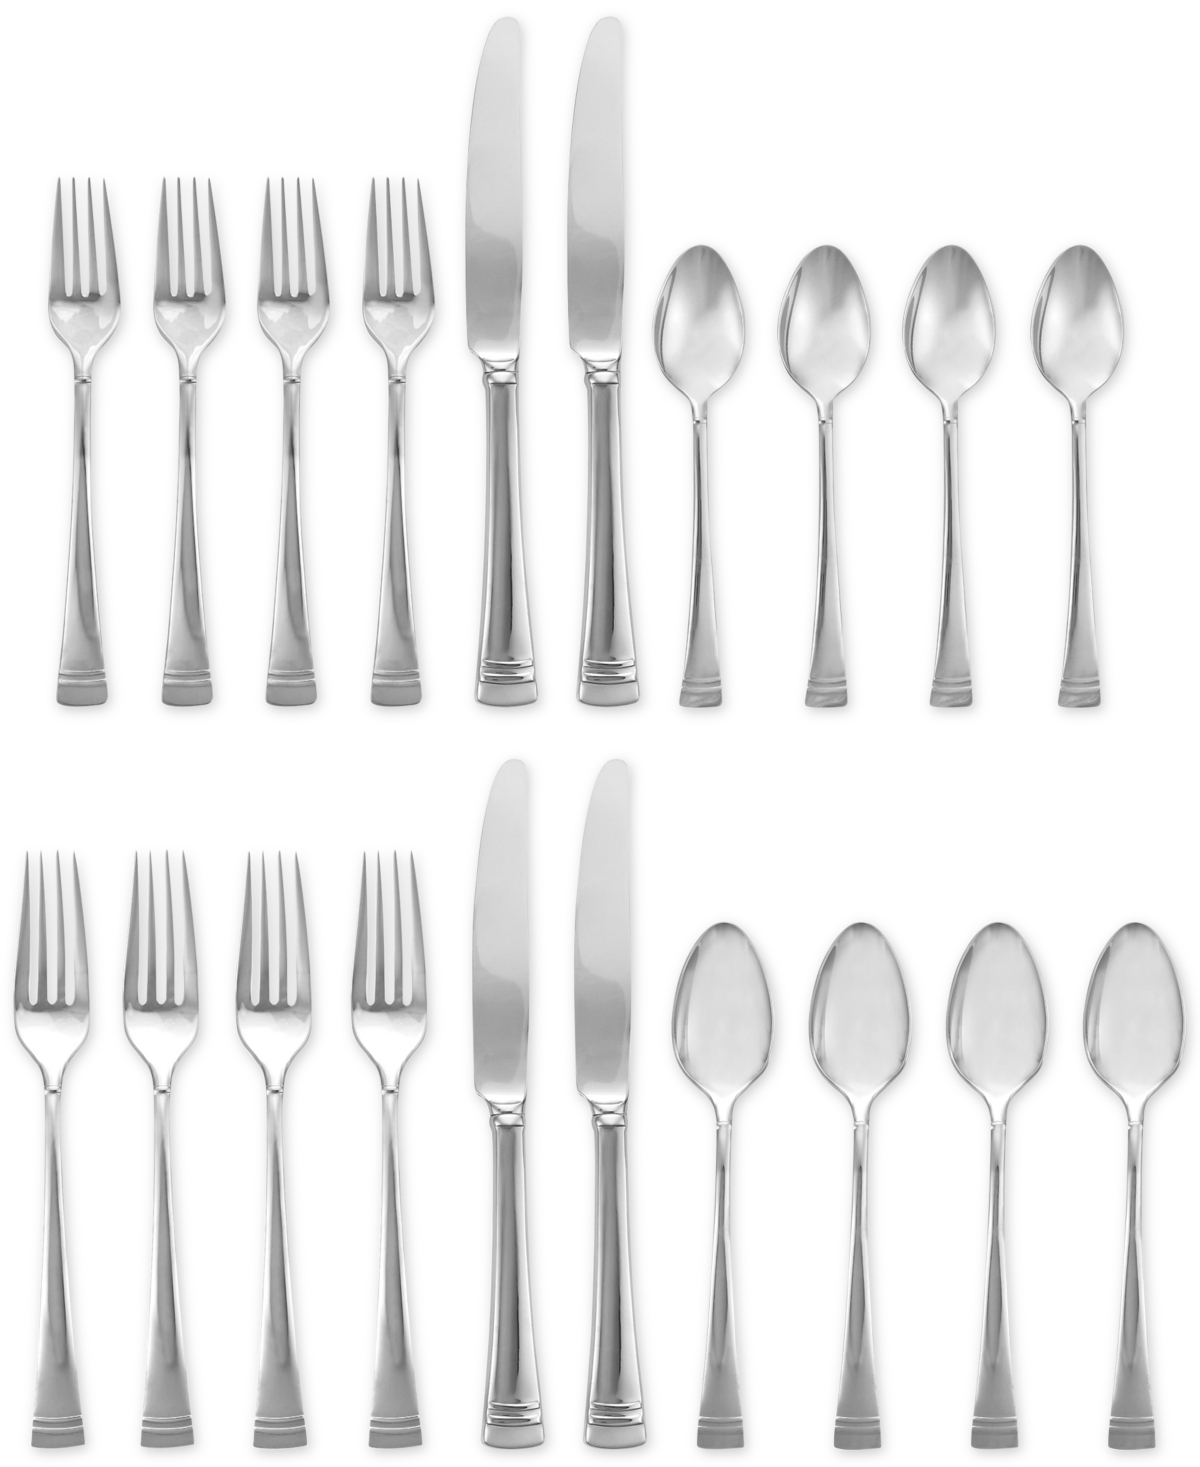 Gorham Lenox 20-pc. Federal Platinum Flatware Set, Service For 4 In Stainless